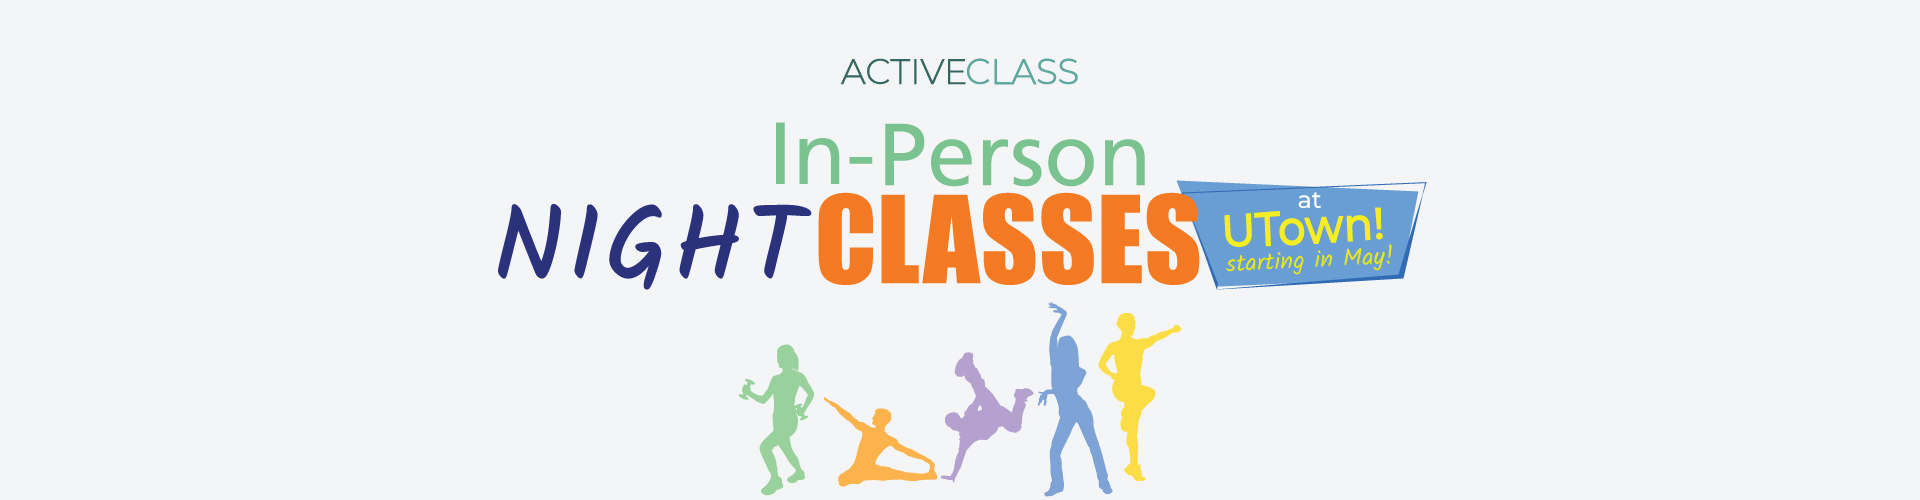 ActiveClassesUTown23_May-July_Activities_1920x500px